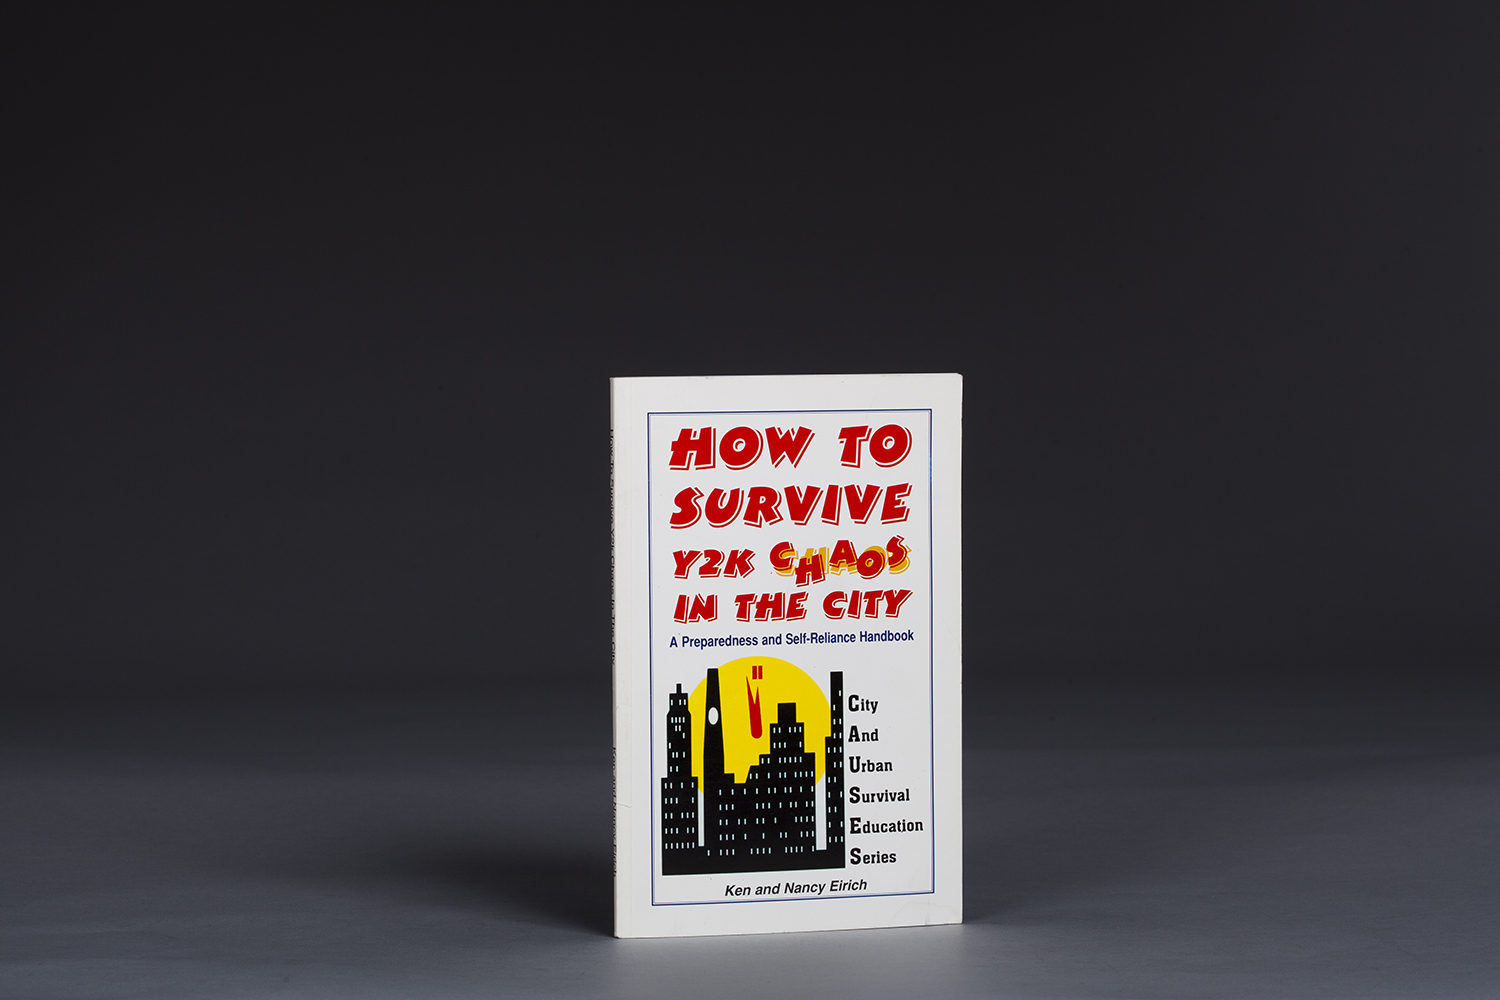 How to Survive Y2K Chaos in the City - 0562 Cover.jpg